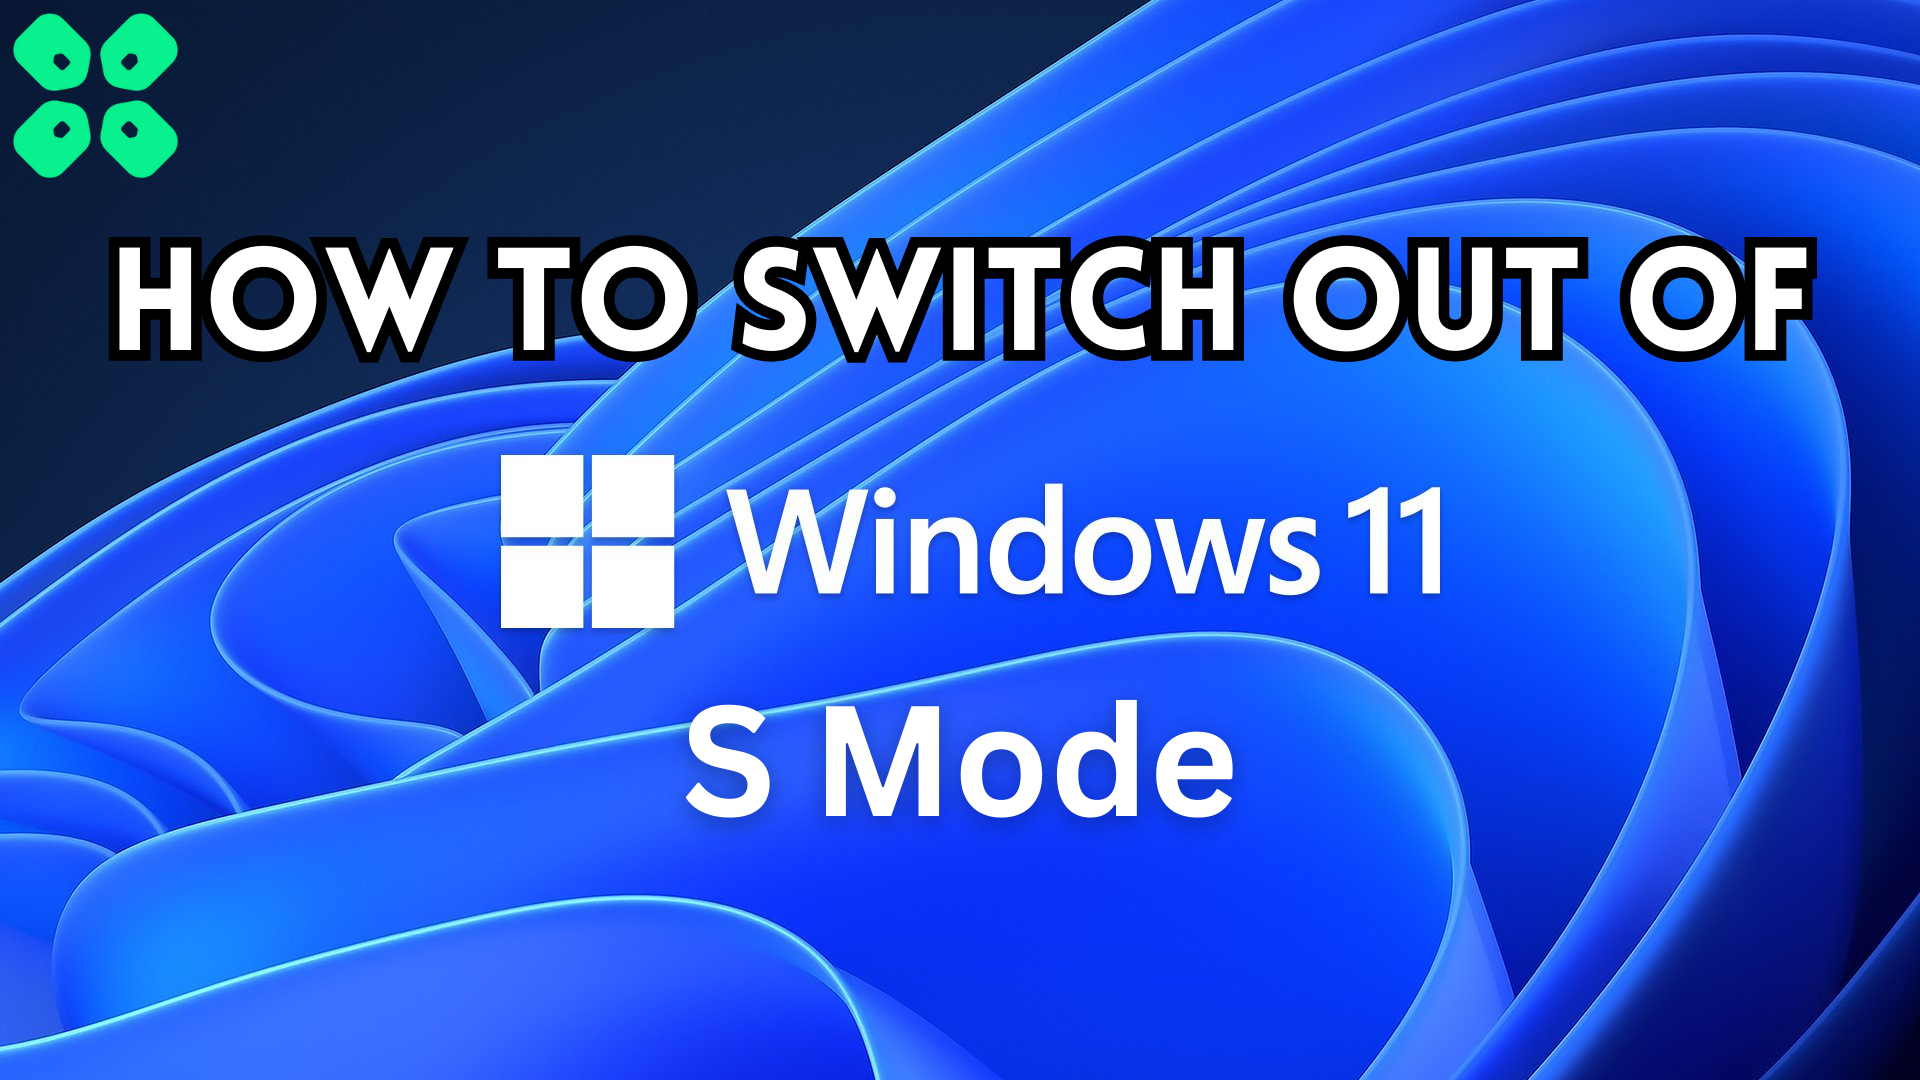 How to Switch Out of Windows 11 S Mode